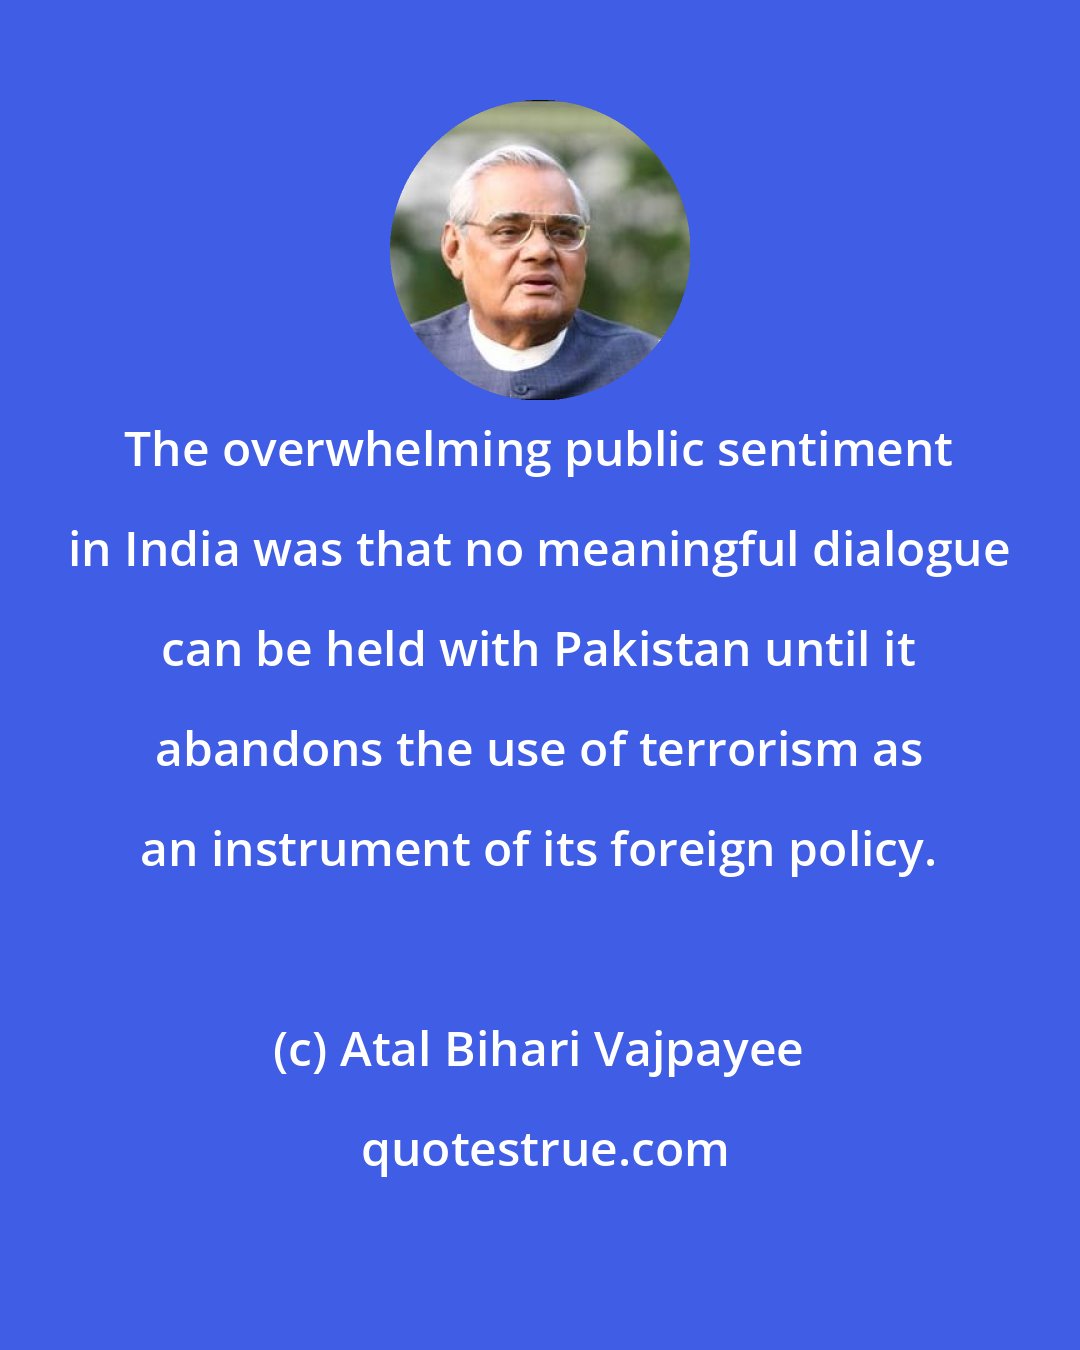 Atal Bihari Vajpayee: The overwhelming public sentiment in India was that no meaningful dialogue can be held with Pakistan until it abandons the use of terrorism as an instrument of its foreign policy.